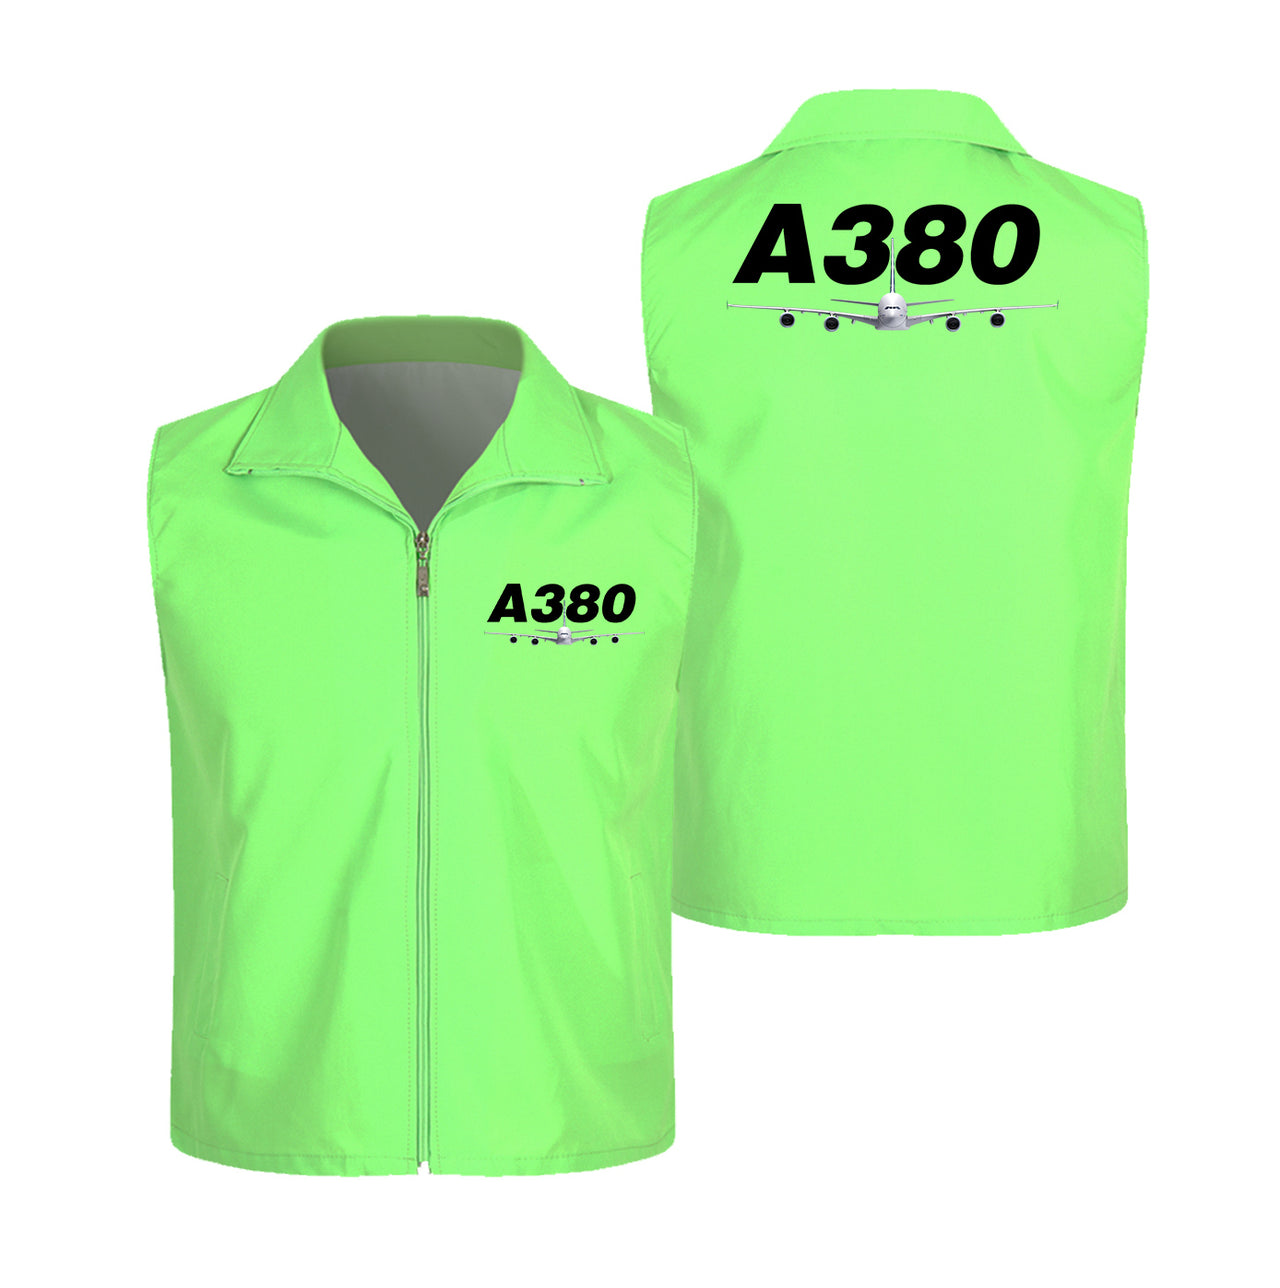 Super Airbus A380 Designed Thin Style Vests